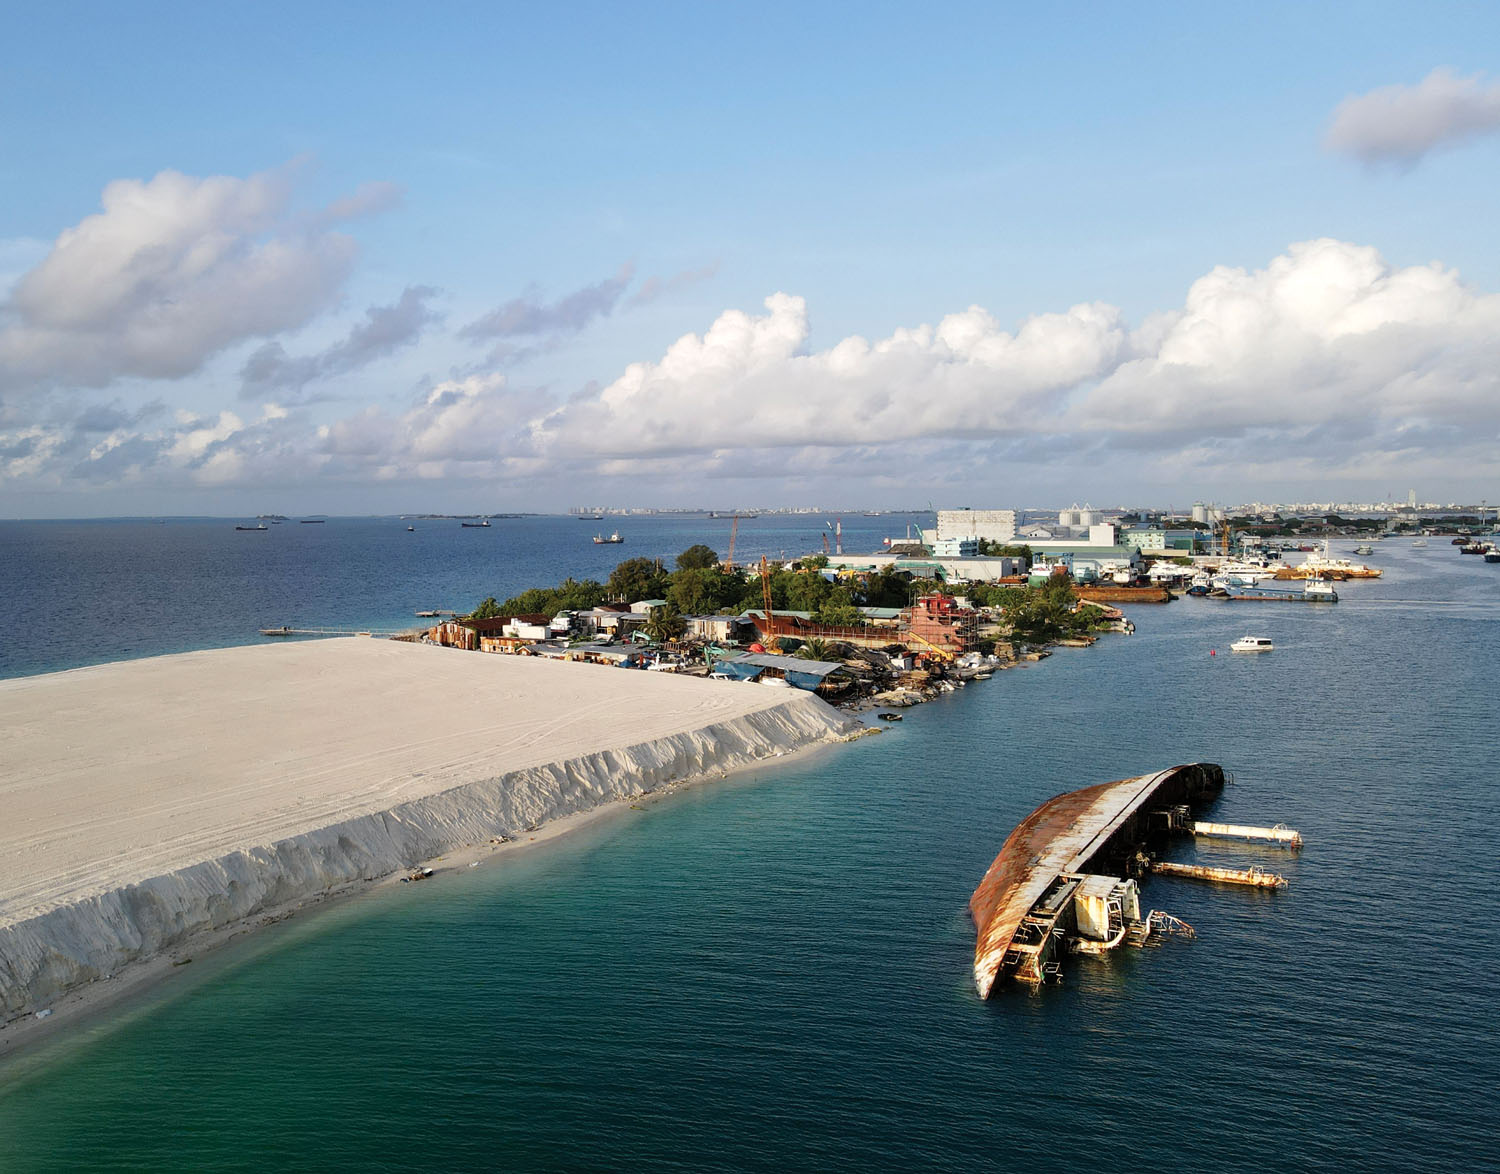 Newly reclaimed area on the island of Thilafushi, first established to help address the problem of excess waste in Malé, the capital city of Maldives. The increase in visitors has led to an almost unmanageable amount of garbage.